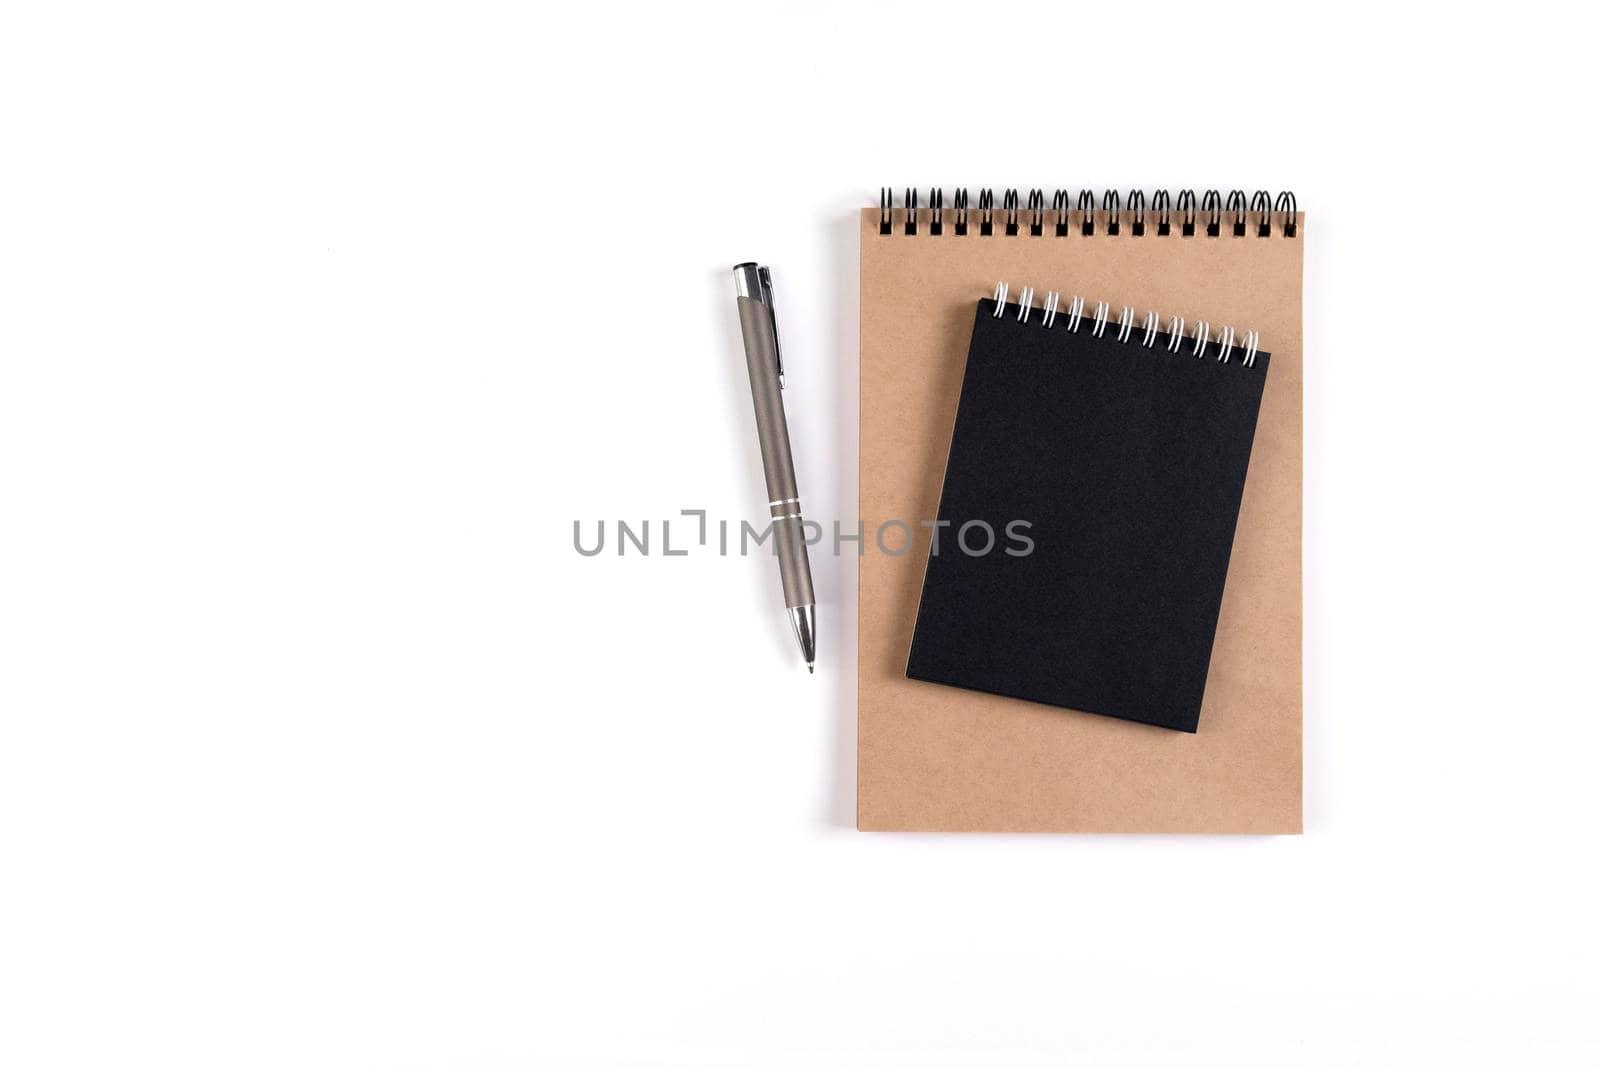 Two blank spiral notepads stacked on a white background next to an automatic pen. Notepads with black and recycled sheets. Education, office.